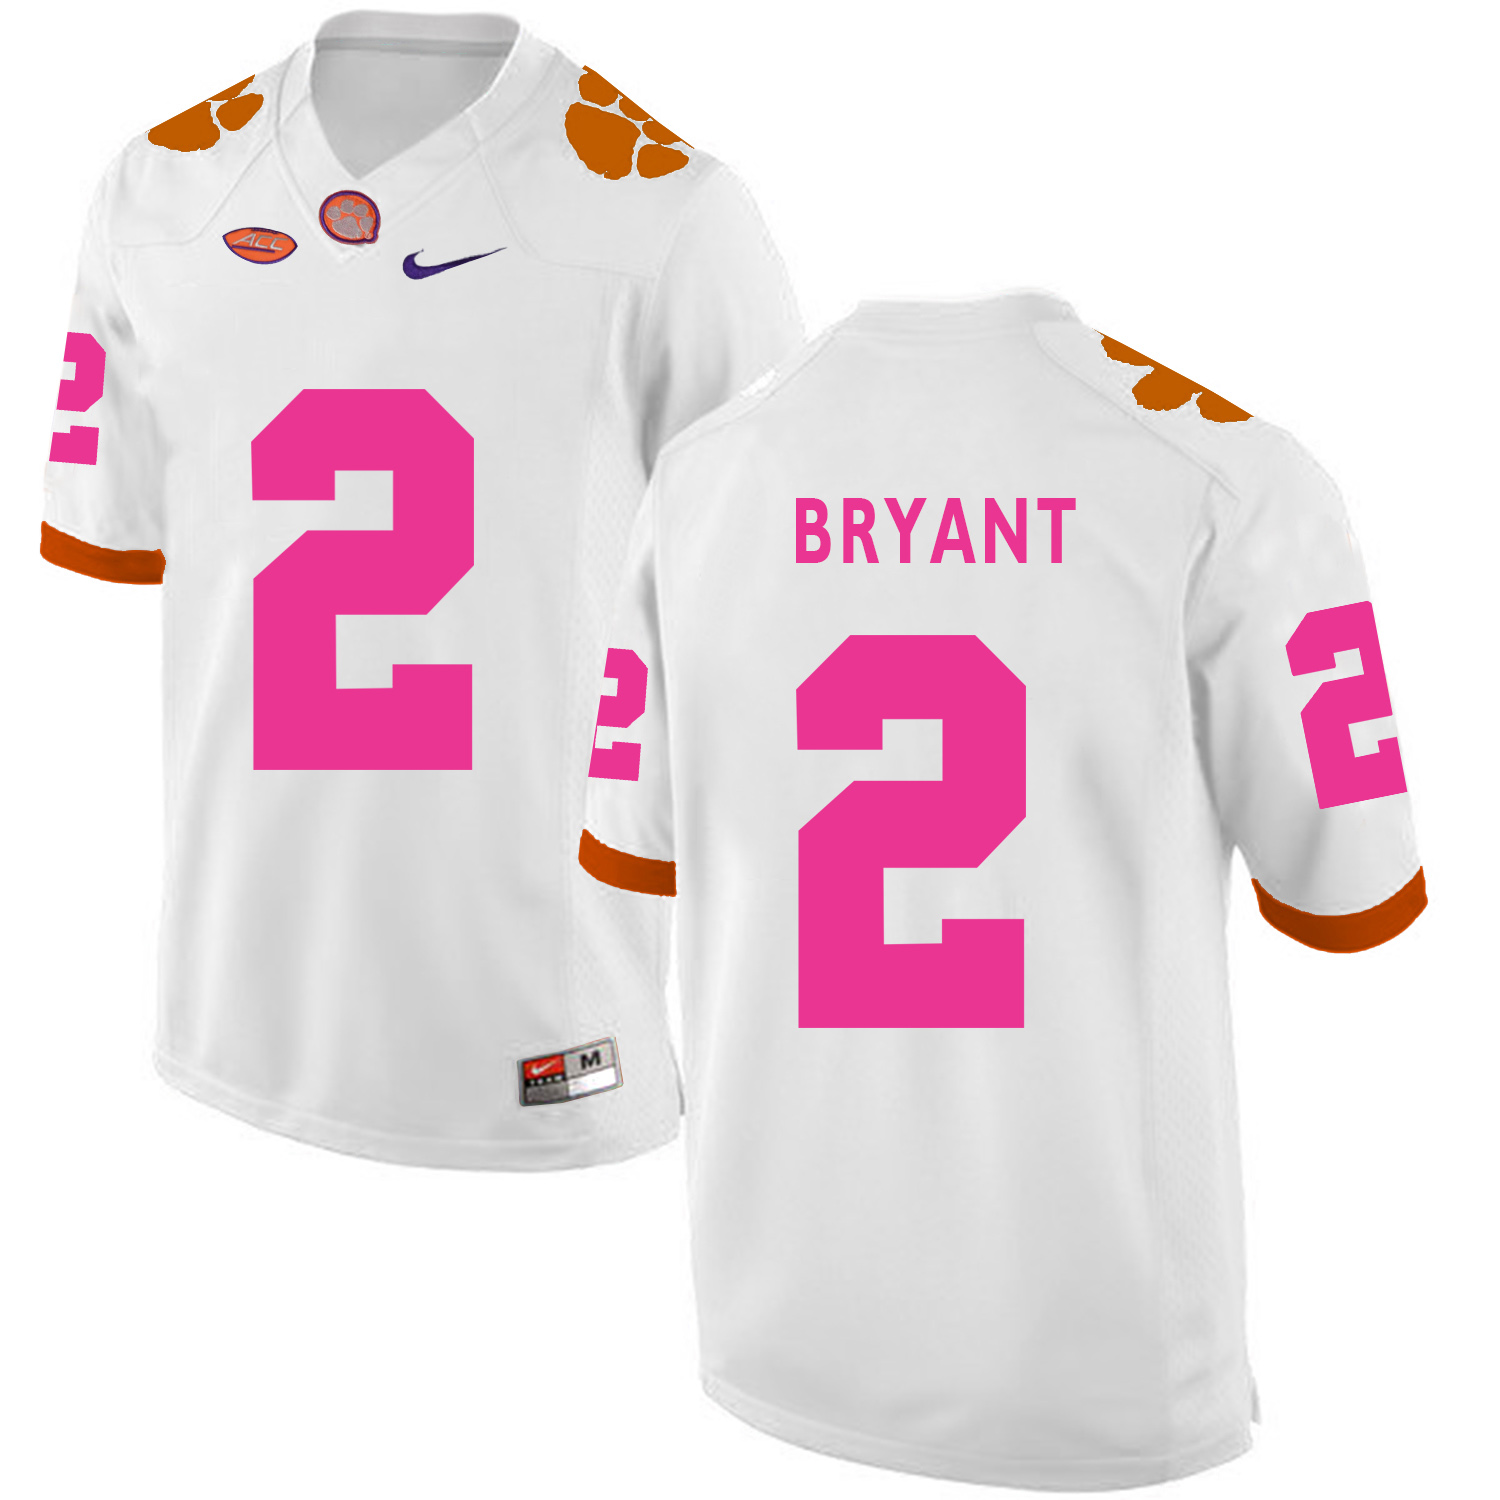 Clemson Tigers 2 Kelly Bryant White 2018 Breast Cancer Awareness College Football Jersey